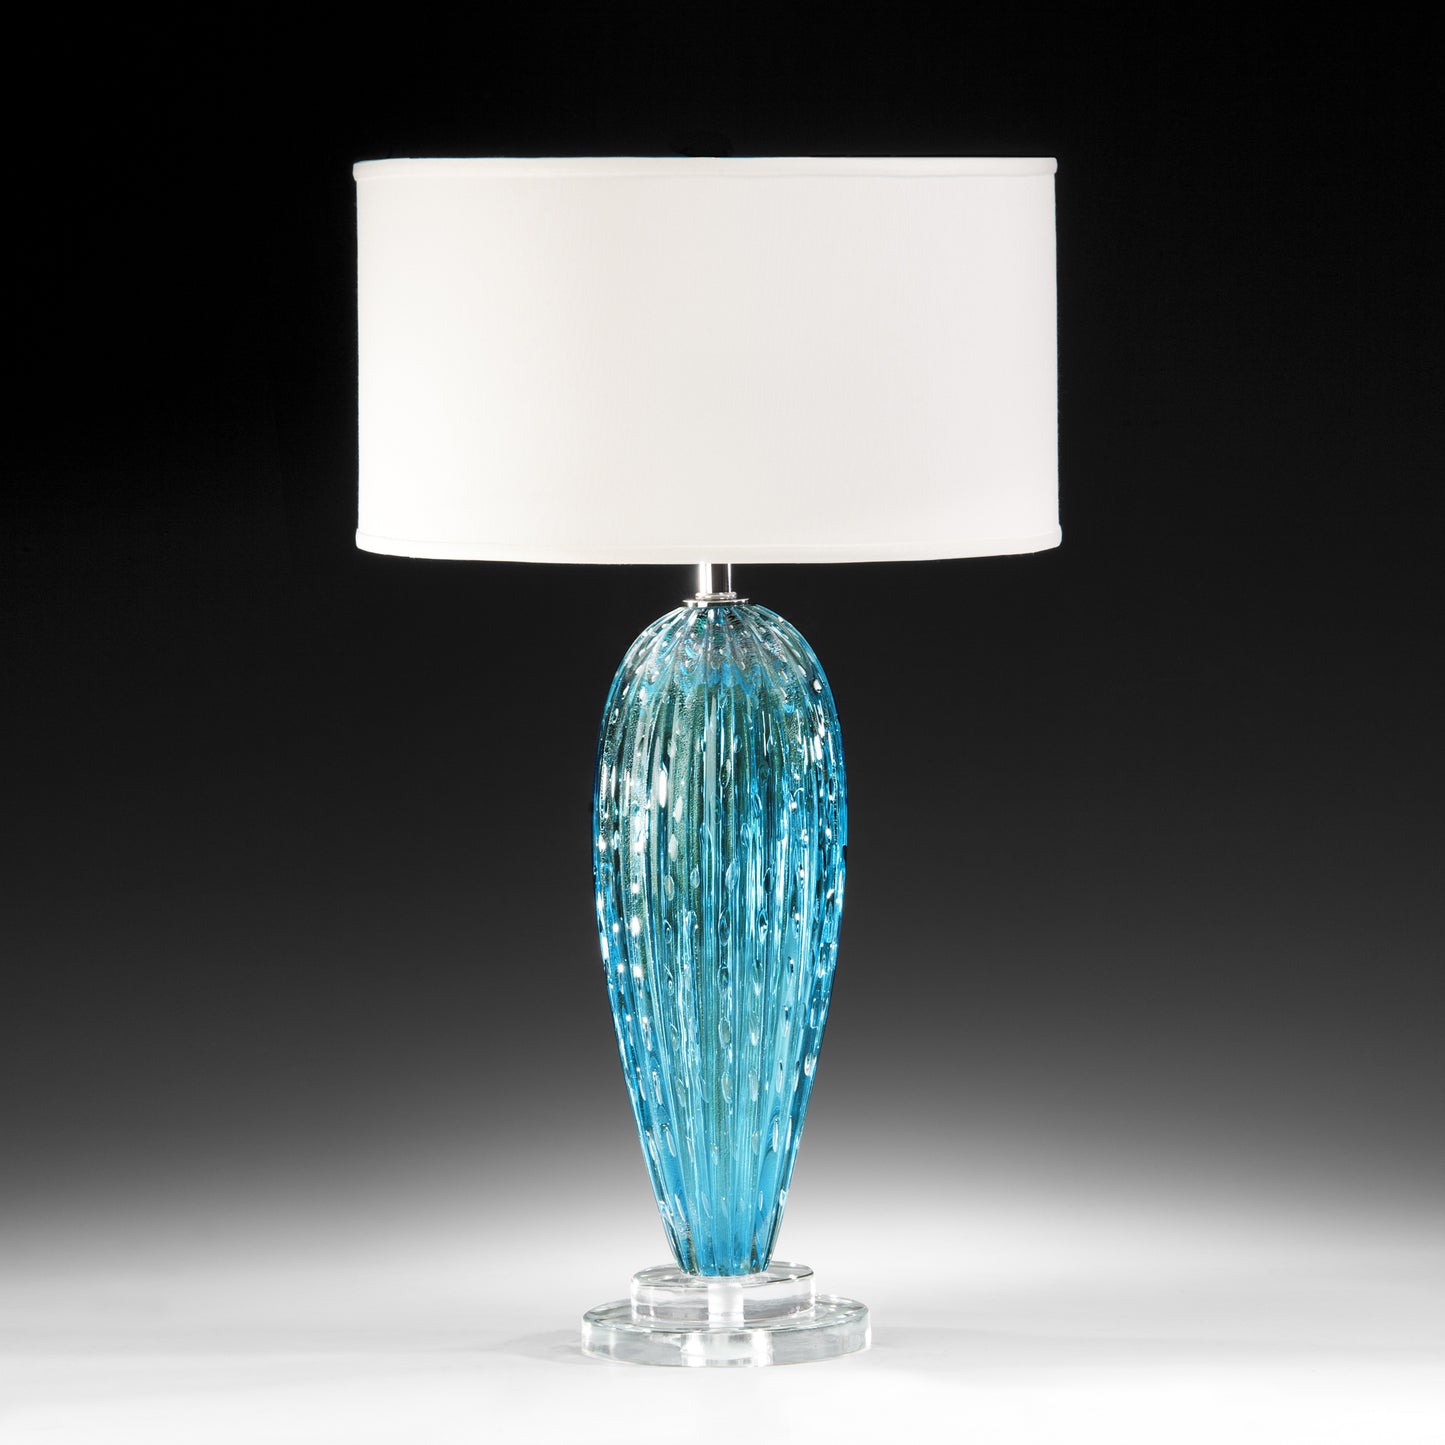 Aqua Venetian glass table lamp with polished nickel accent..